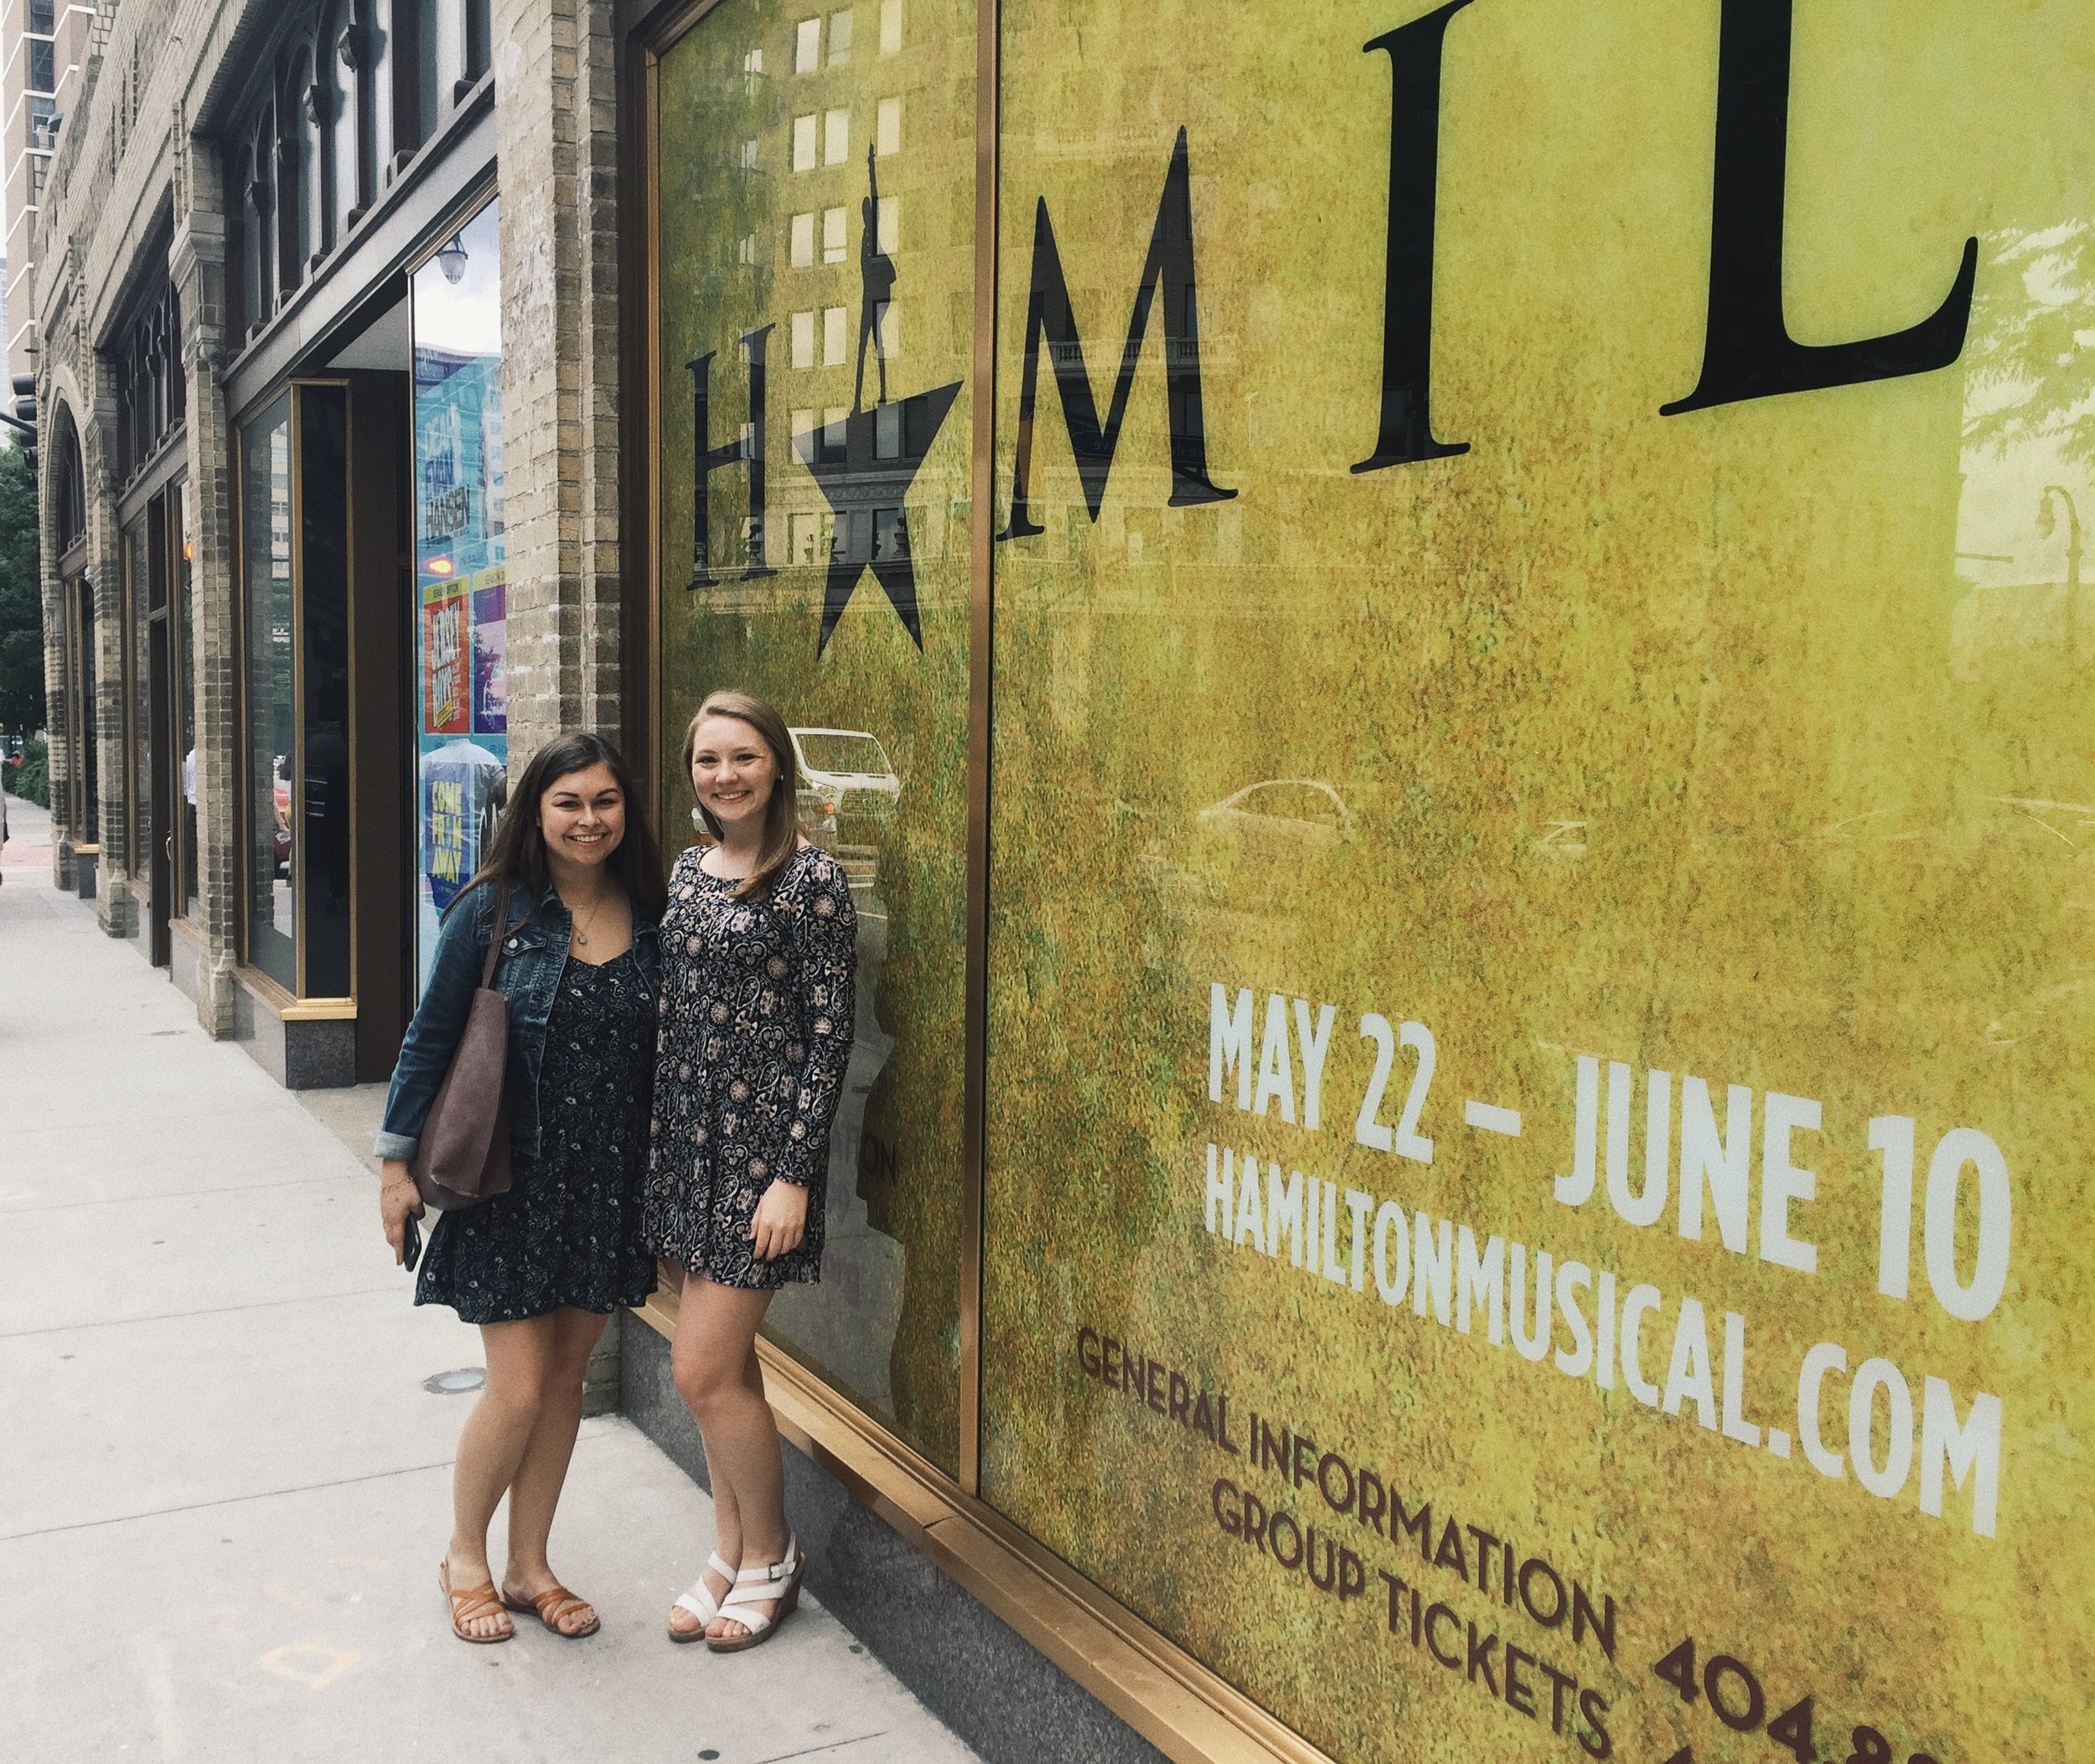 finally saw hamilton with my friend!&nbsp;we used to perform together at our vocal recitals in high school and sang a lot of musical theater together, so it was perfect that she came with &lt;3